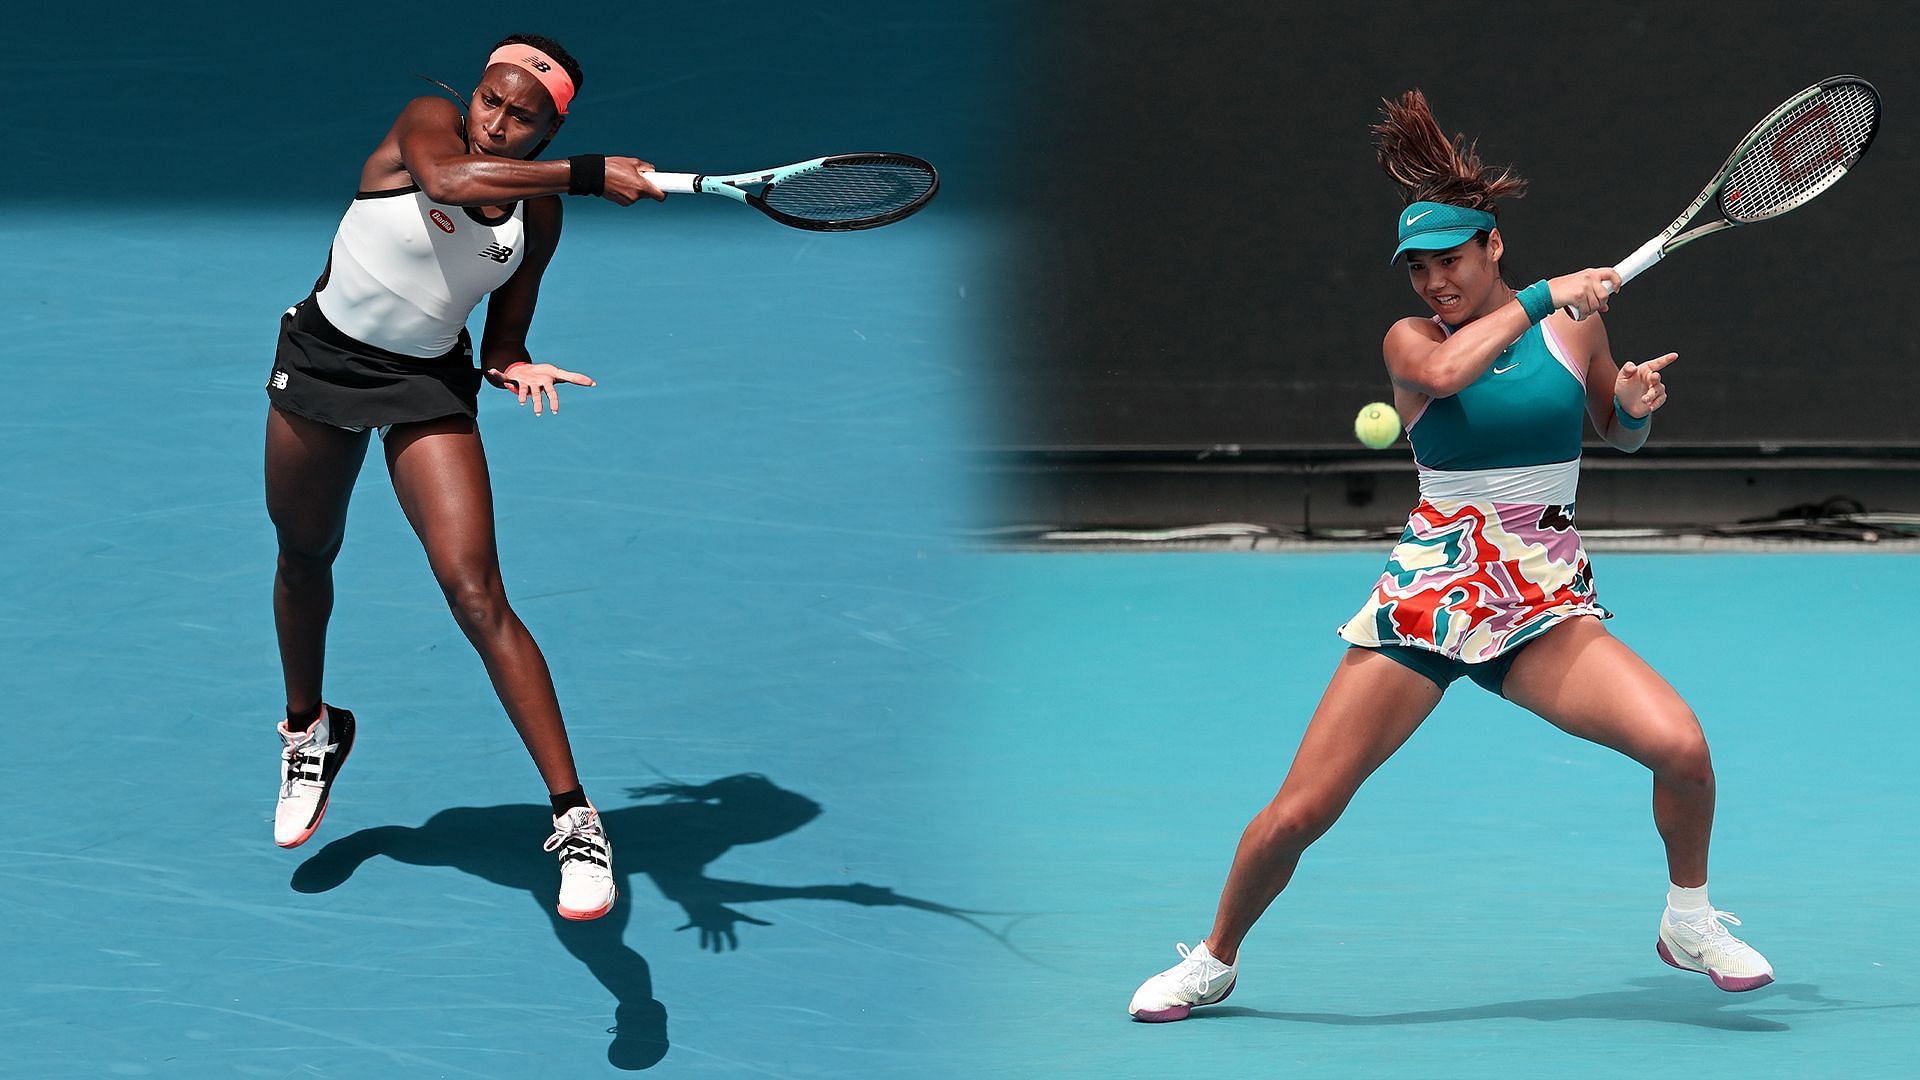 Coco Gauff vs Emma Raducanu Where to watch, TV schedule, live streaming details and more Australian Open 2023, Round 2